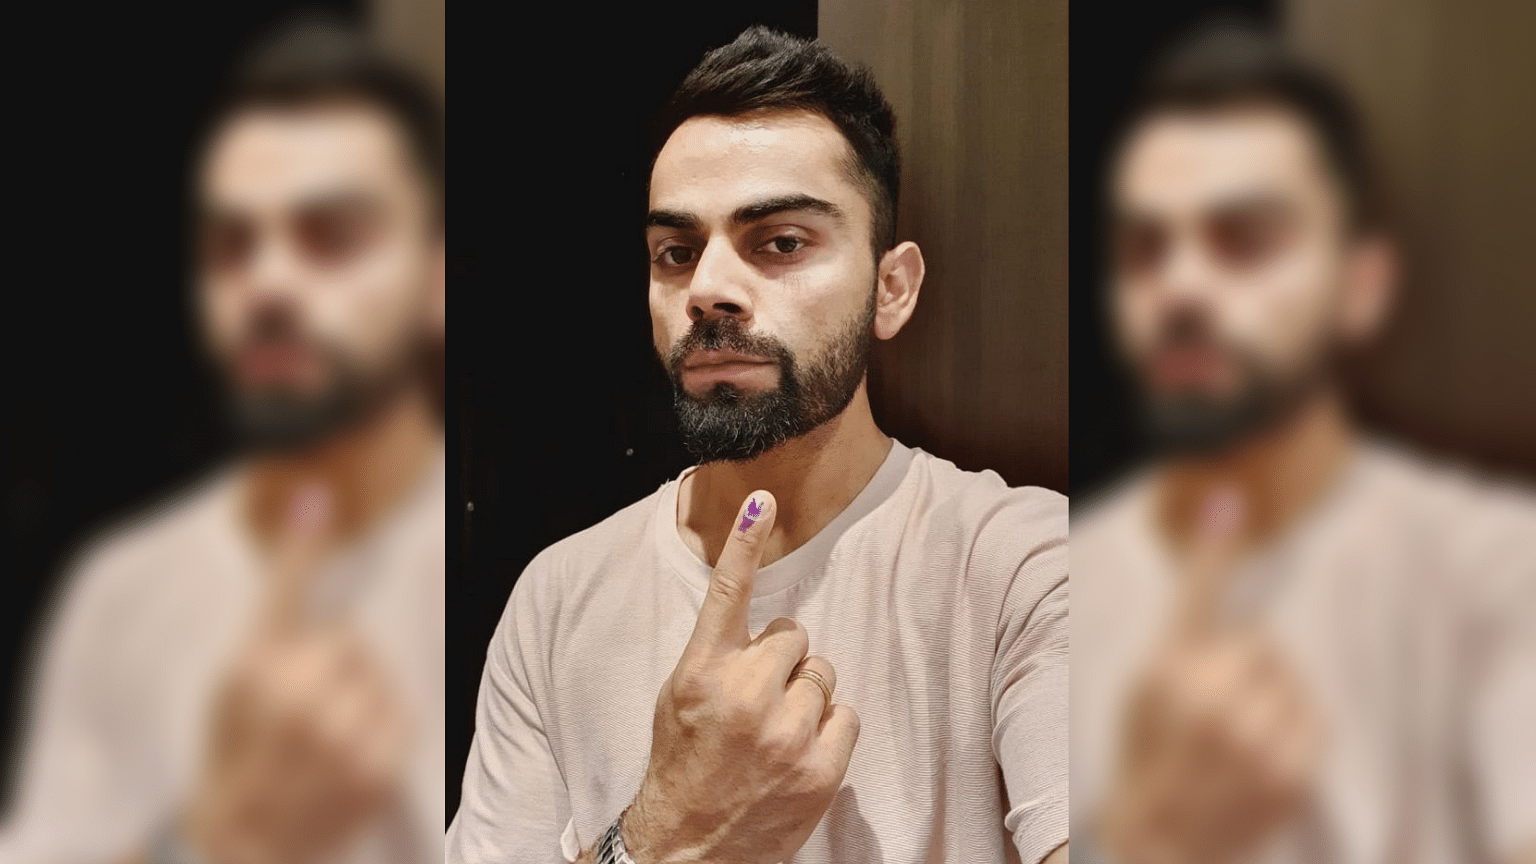 Indian cricket team skipper Virat Kohli cast his vote in Gurugram on Sunday, 12 May, and appealed to voters to exercise their franchise.